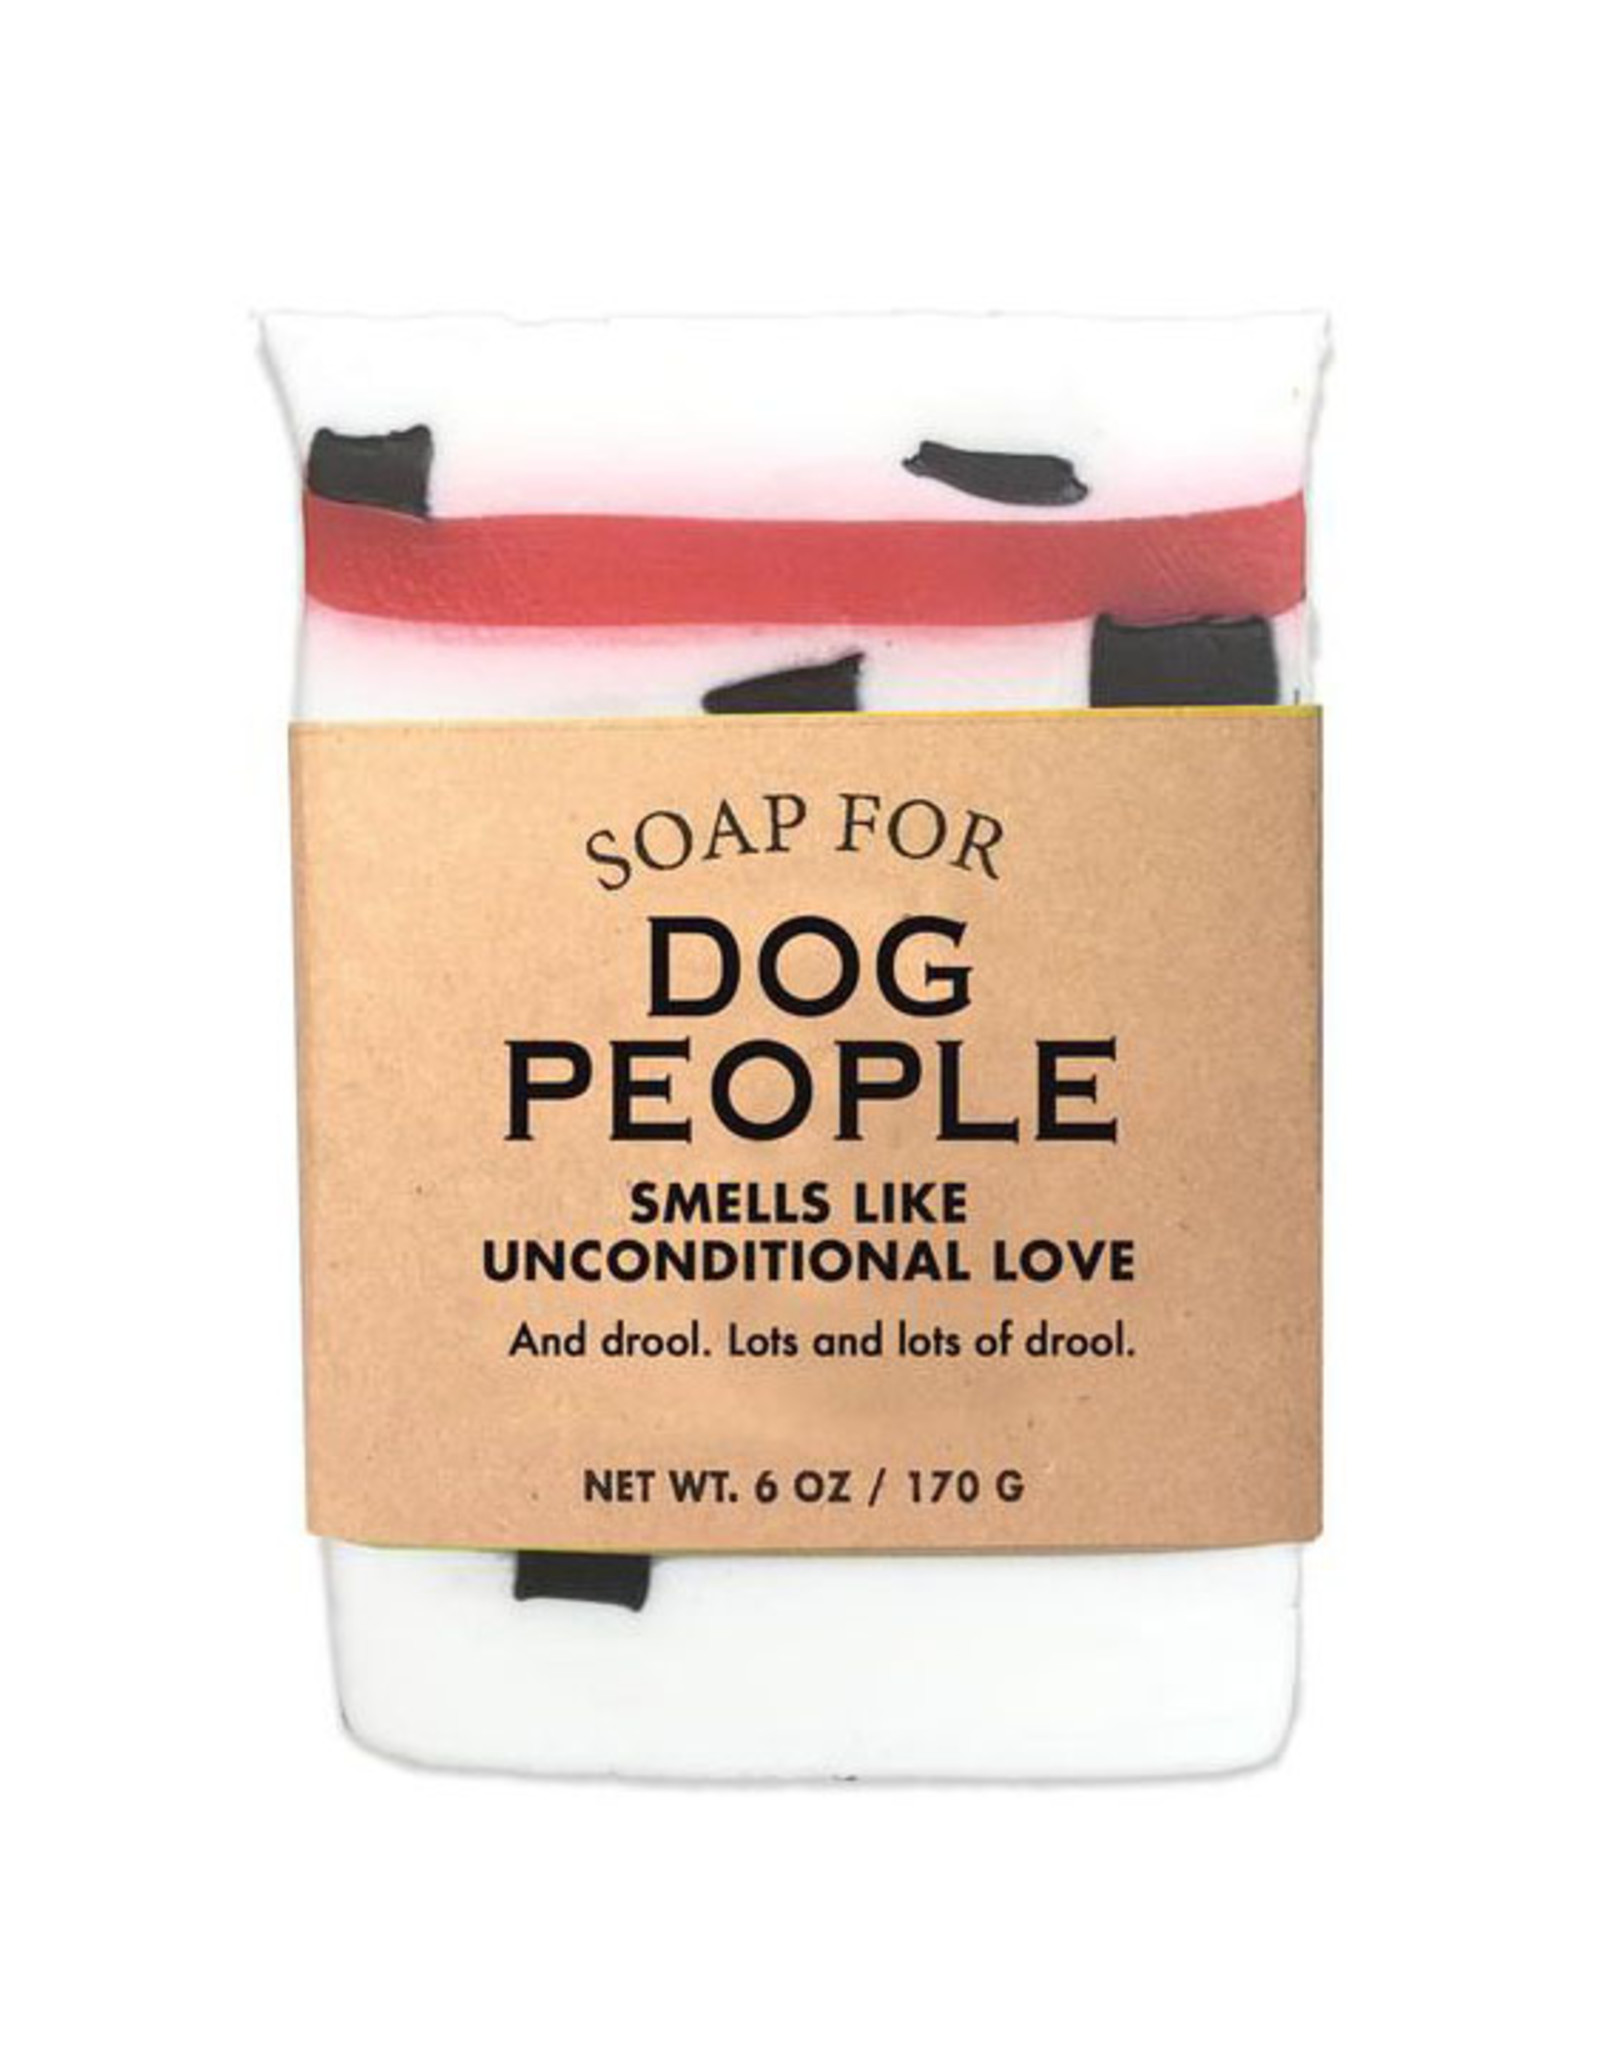 A Soap for Dog People